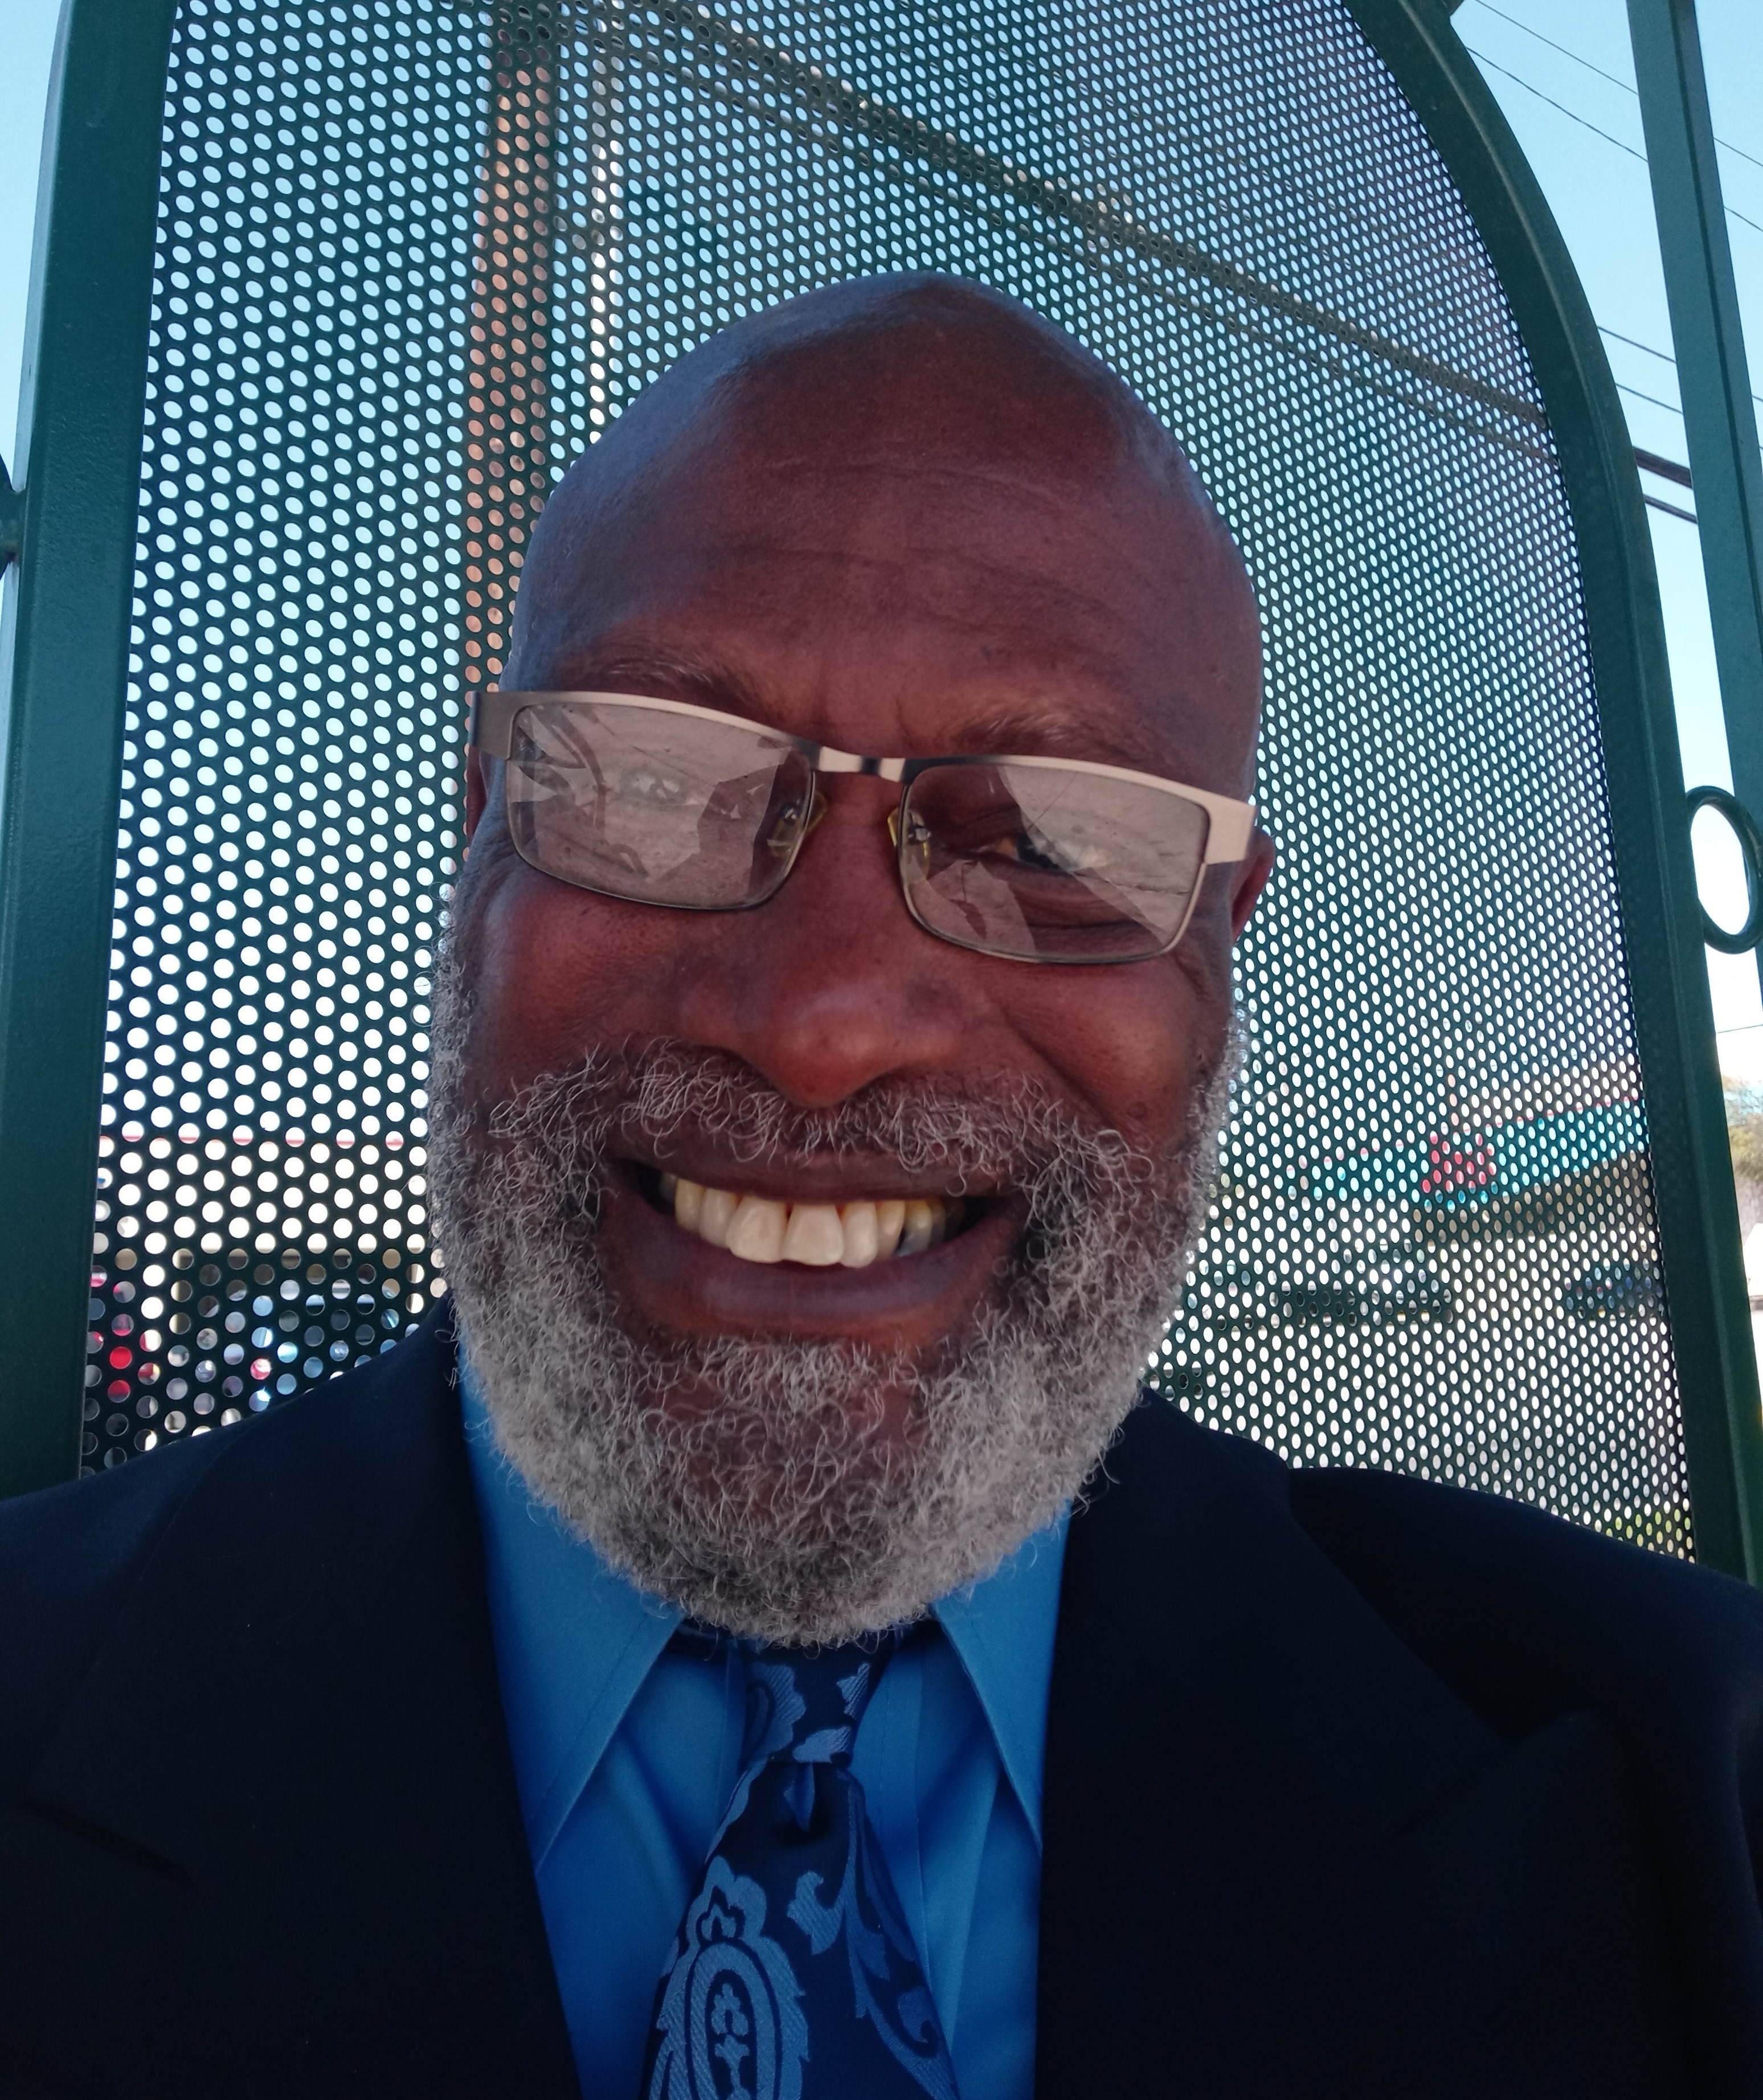 African American man with a beard and glasses smiling.